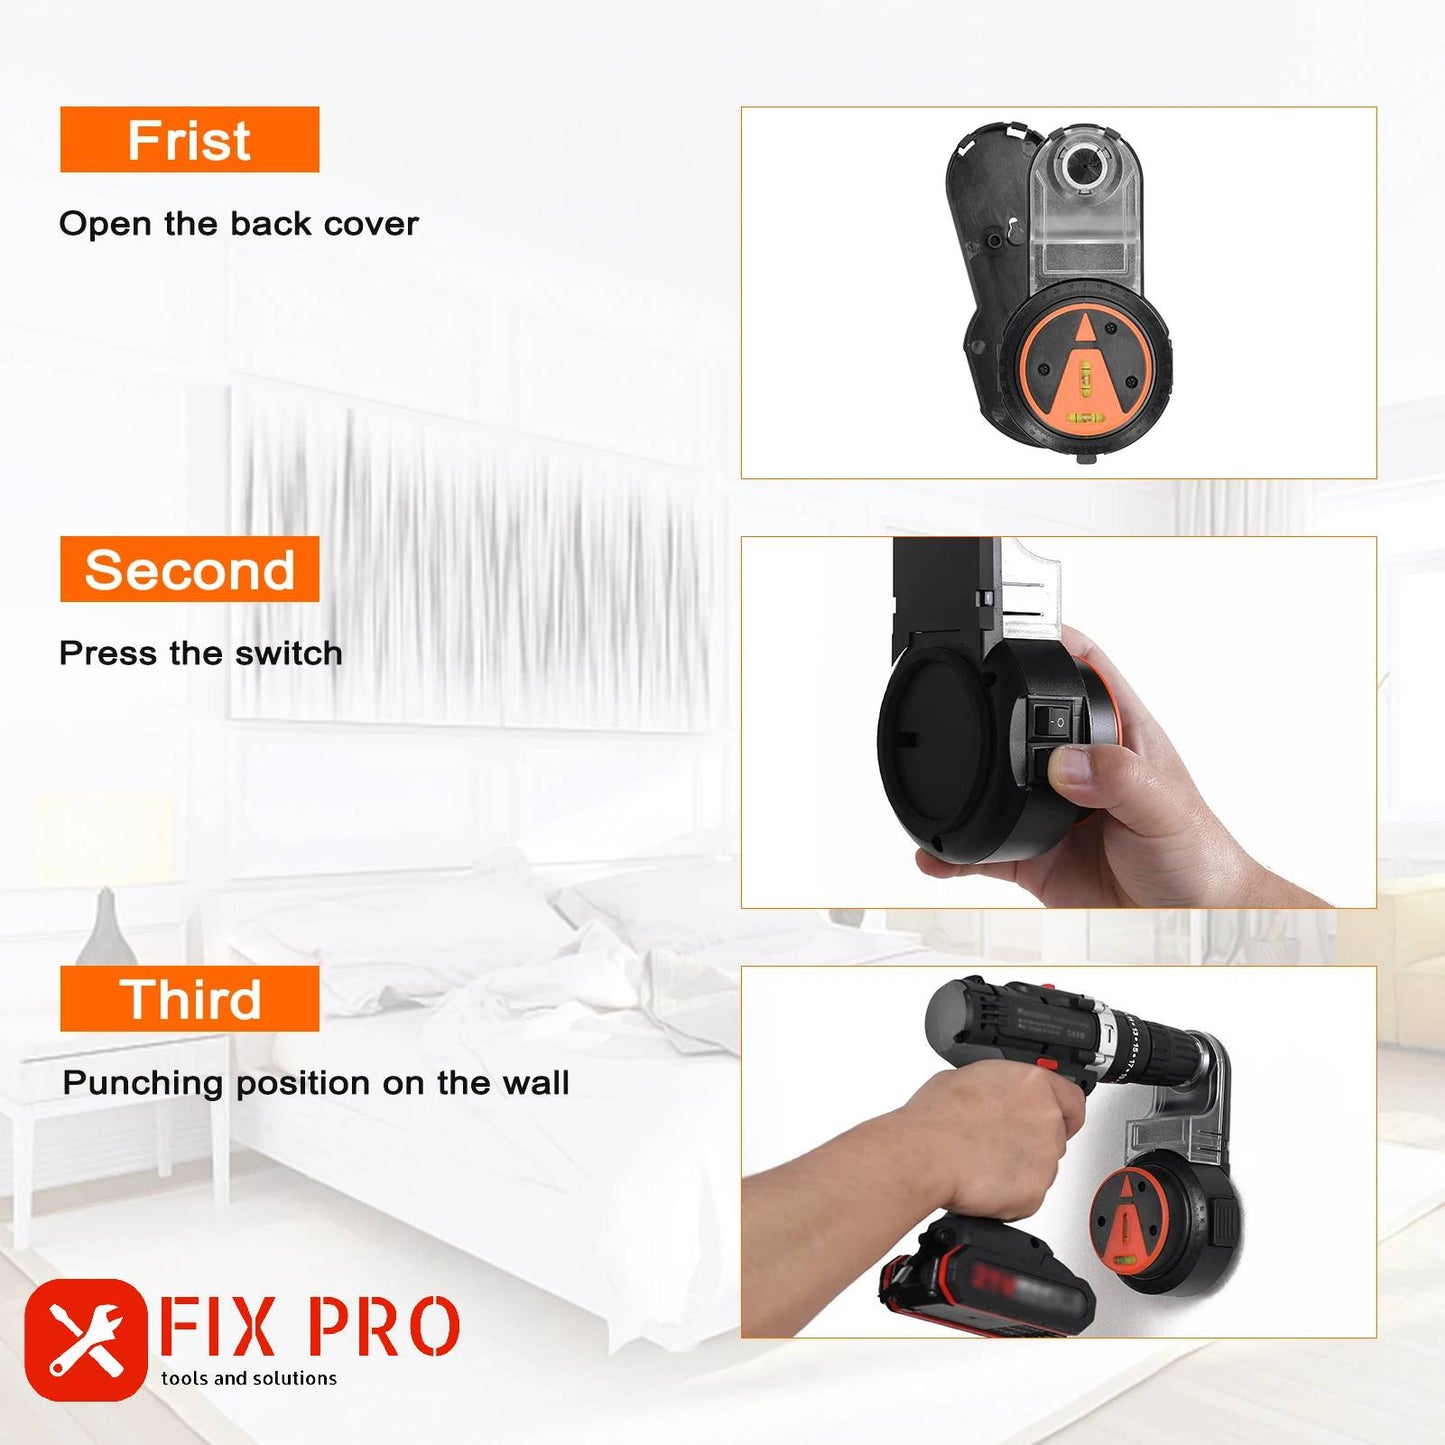 FIX PRO™ 2 In 1 Drilling Dust Collector and 360° Laser Level